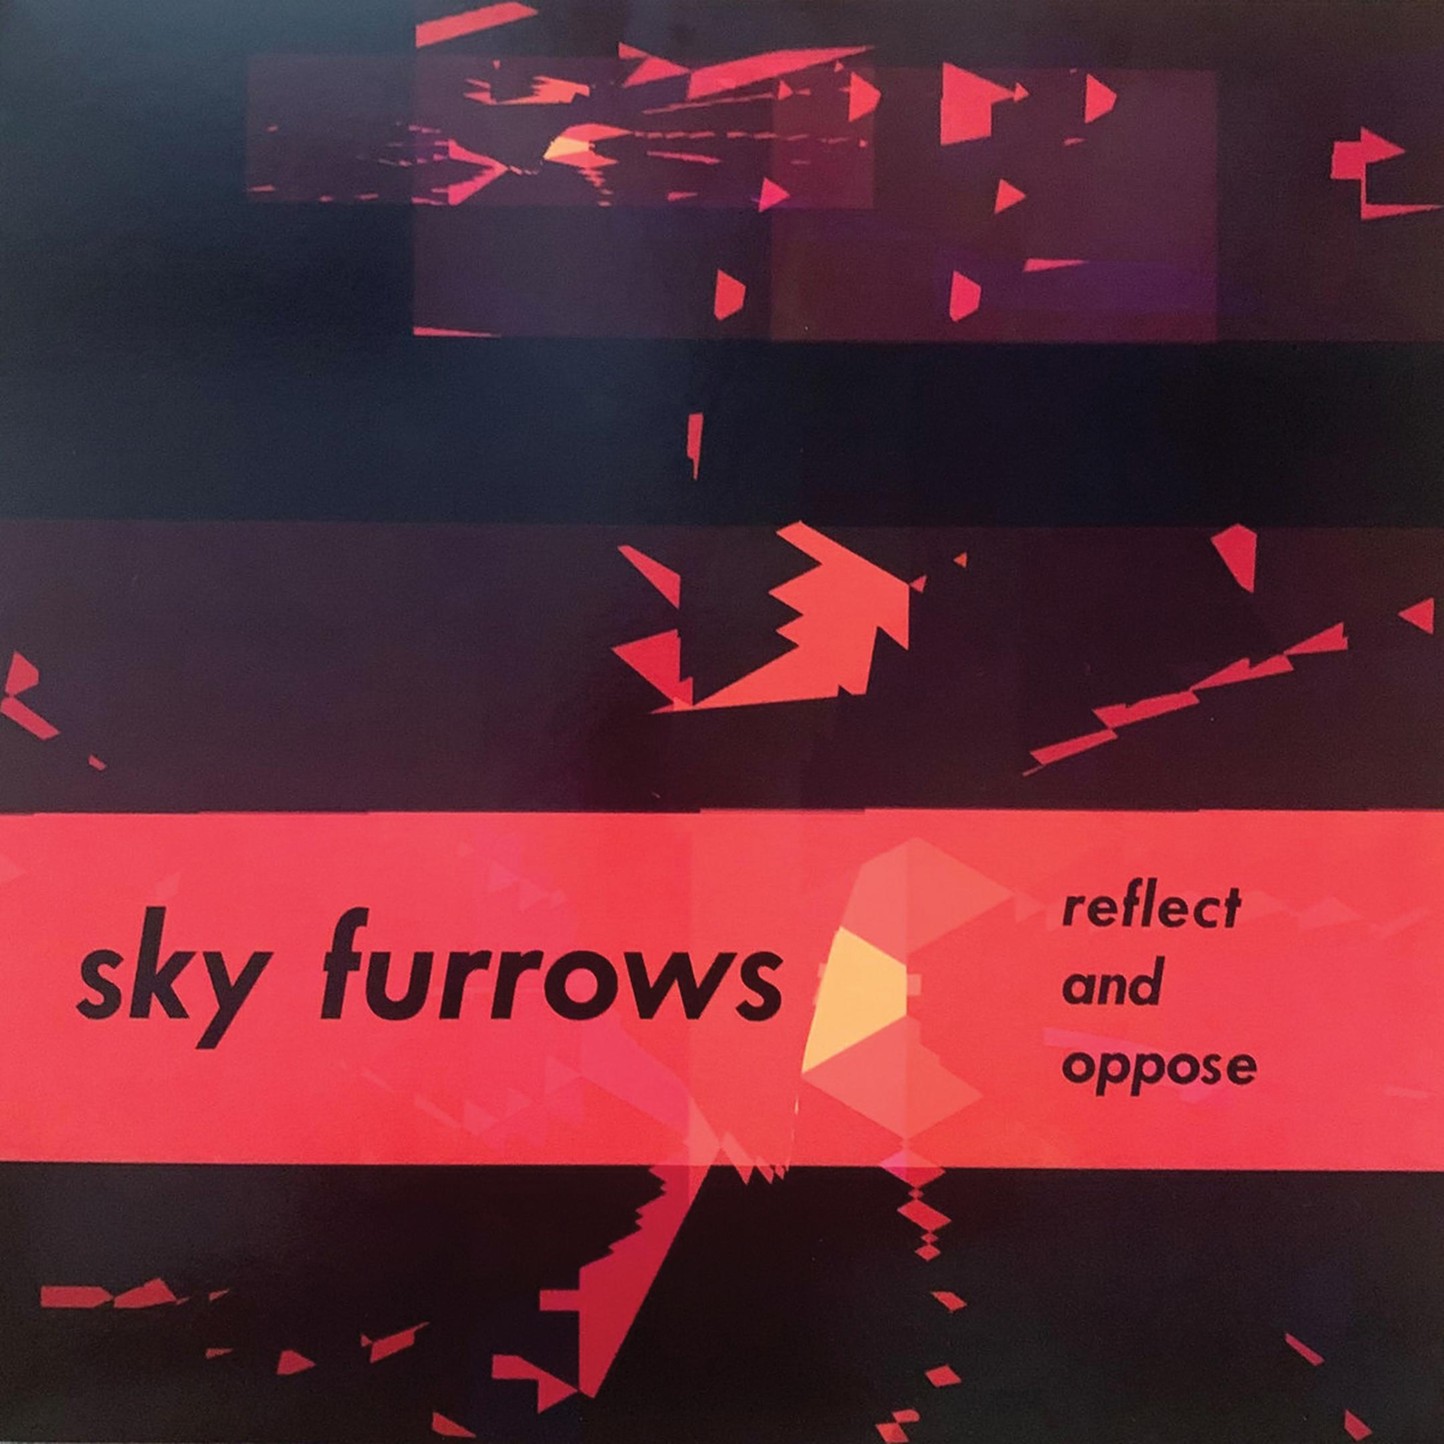 Album Overview: Sky Furrows | Mirror and Oppose